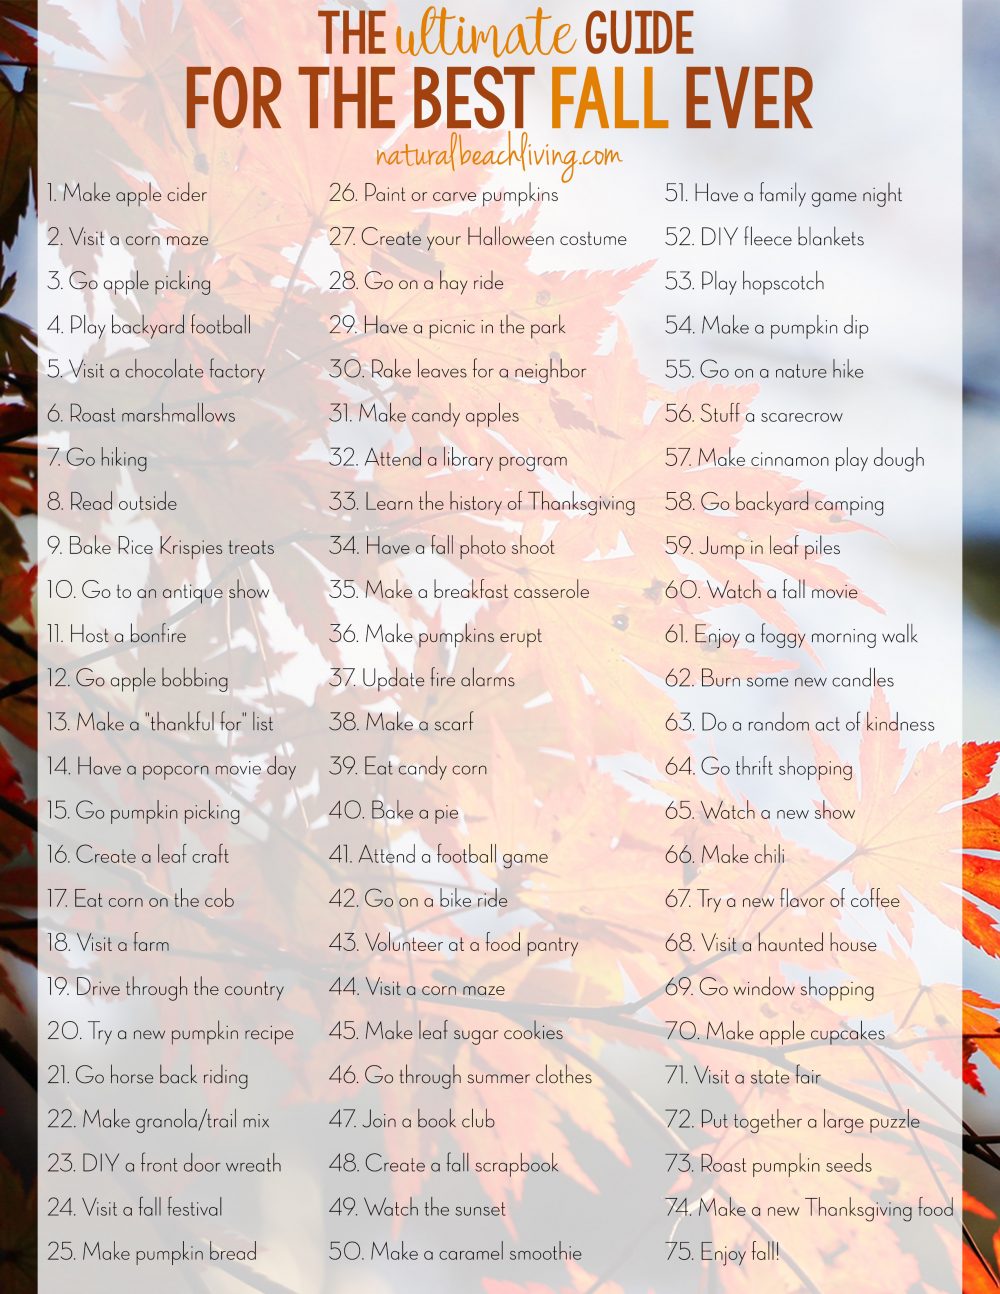 The Ultimate Guide for the Best Fall Ever – Fall Bucket List Printable